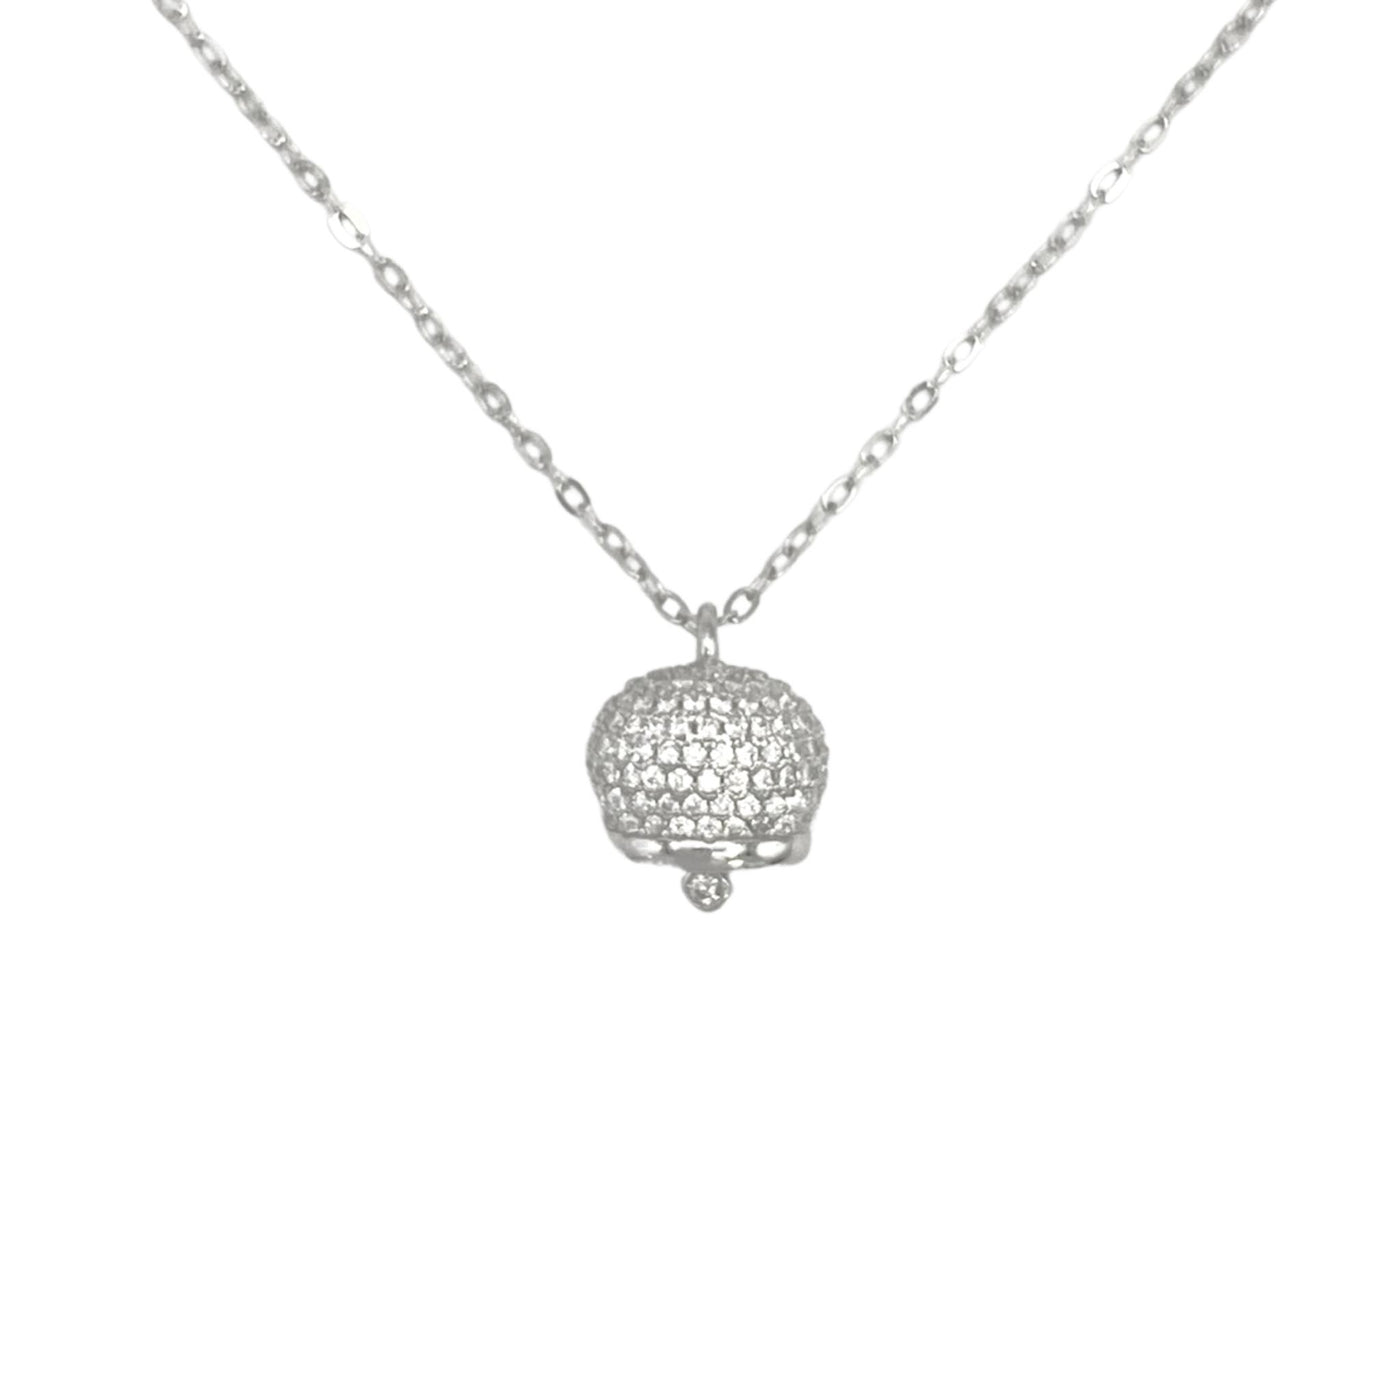 Silver necklace with bell charm